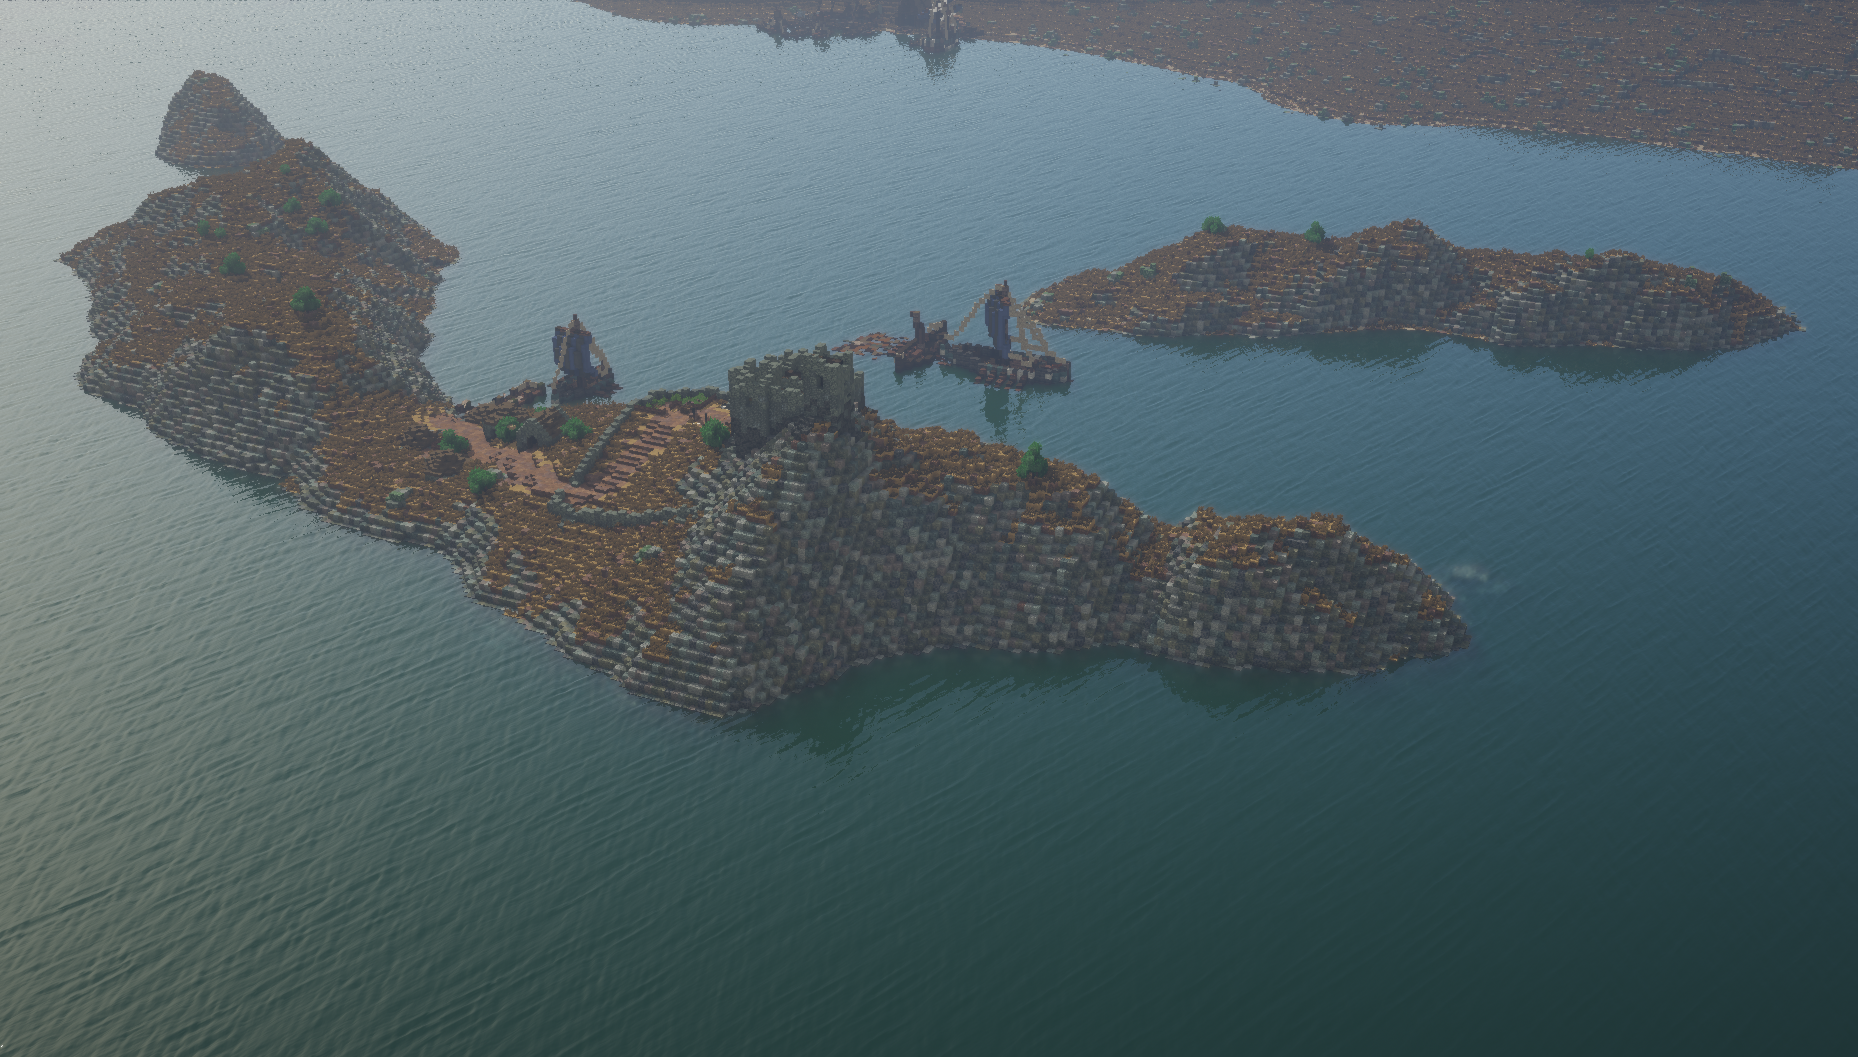 Stony Shore: Now with big water stones